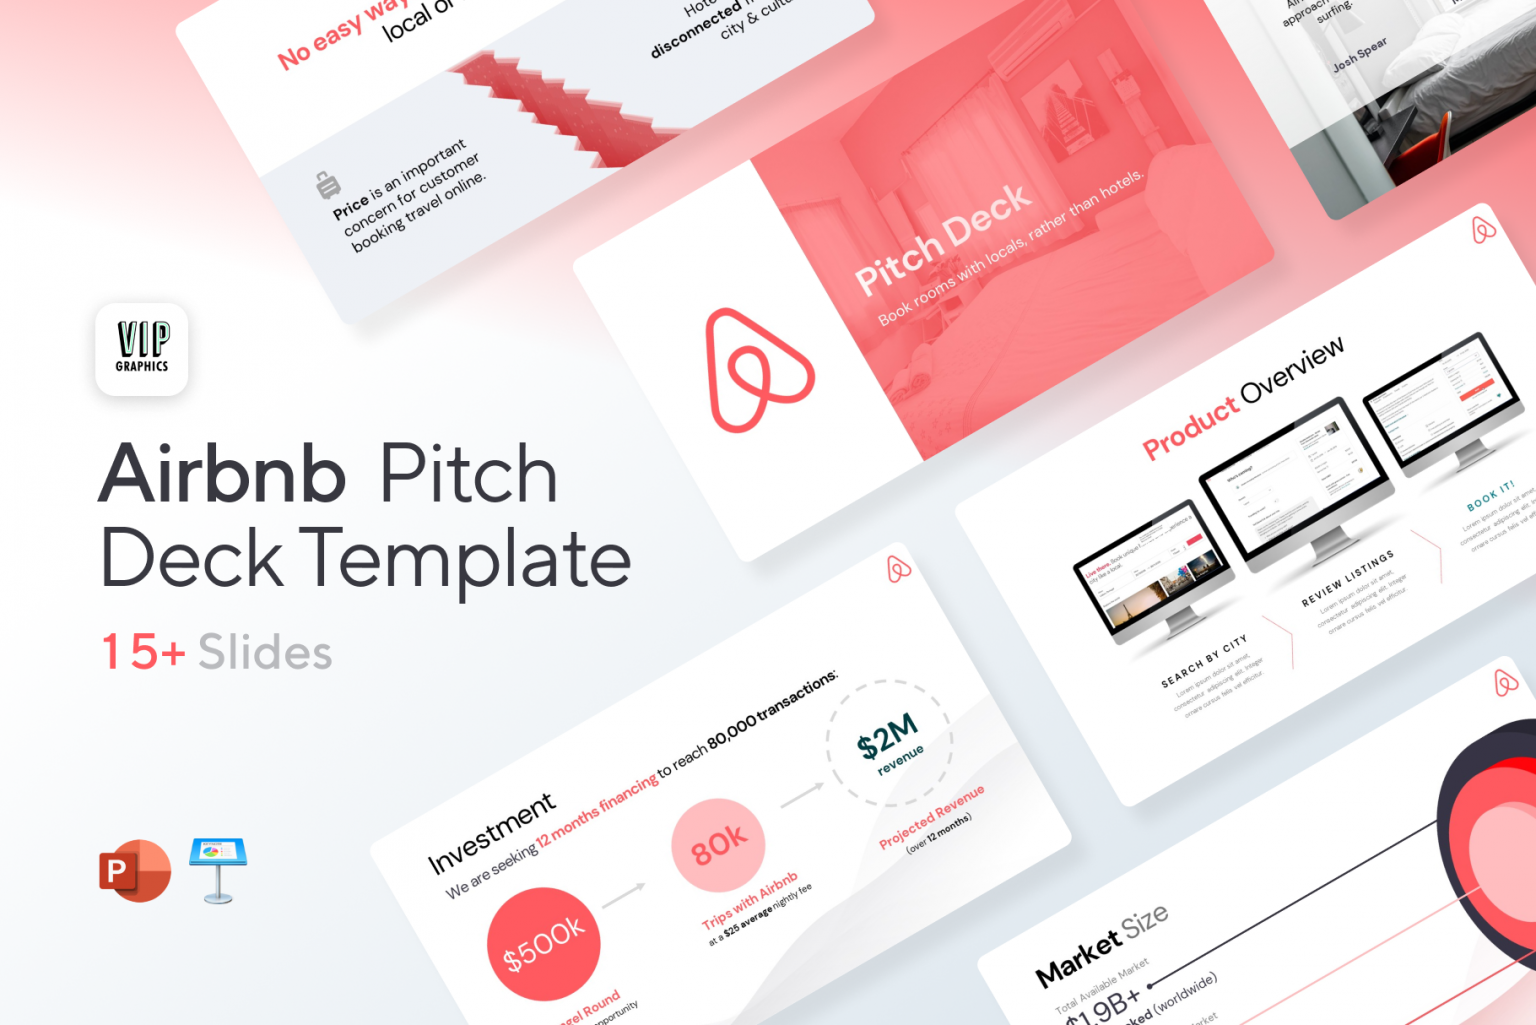 Airbnb Pitch Deck Template VIP Graphics